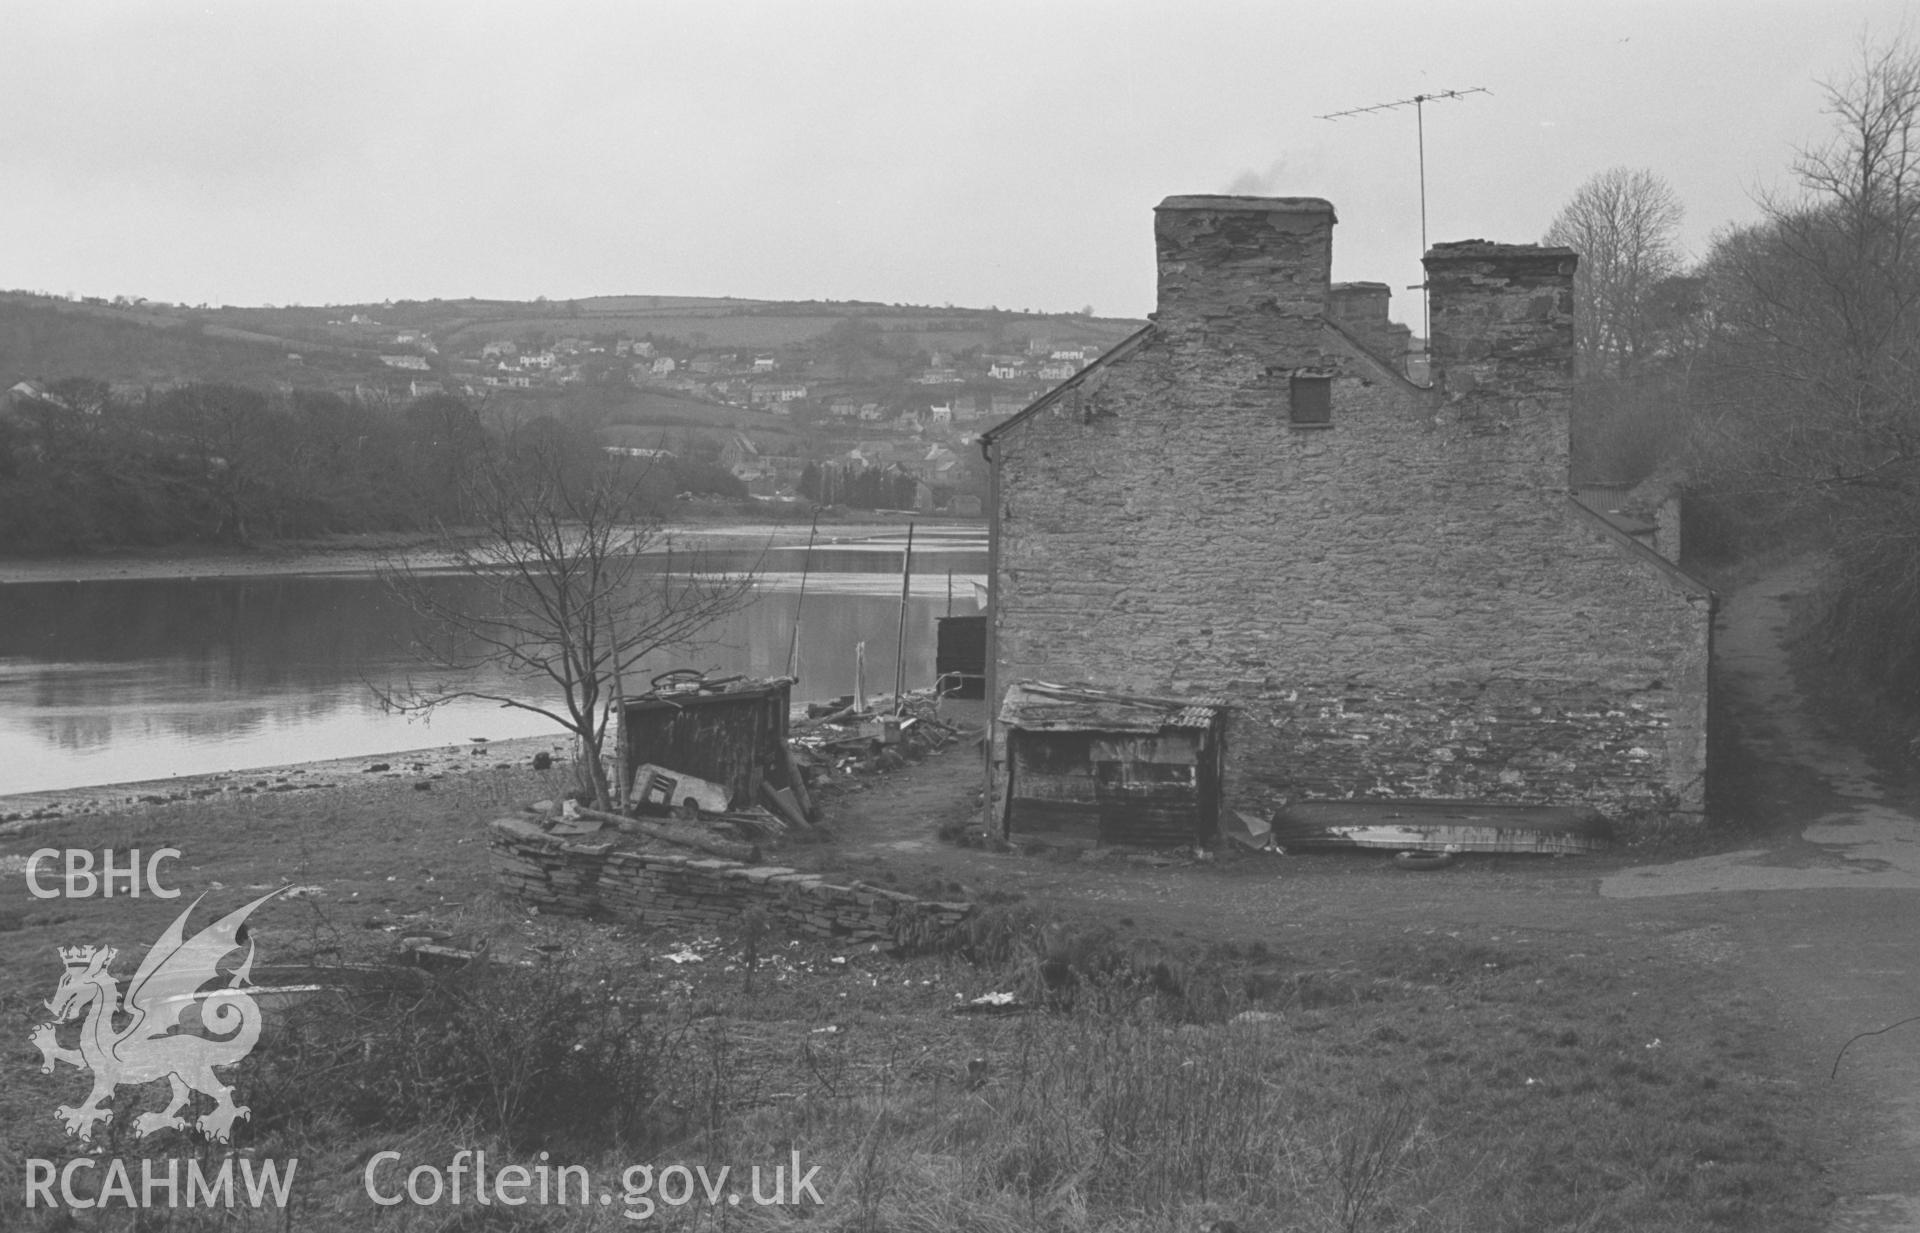 Digital copy of a black and white negative showing old houses (1,2 and 3 Net Pool Road) at the west end of Net Pool, Cardigan. St. Dogmaels in distance. Photographed by Arthur O. Chater in September 1966 looking west from Grid Reference SN 1733 4602.